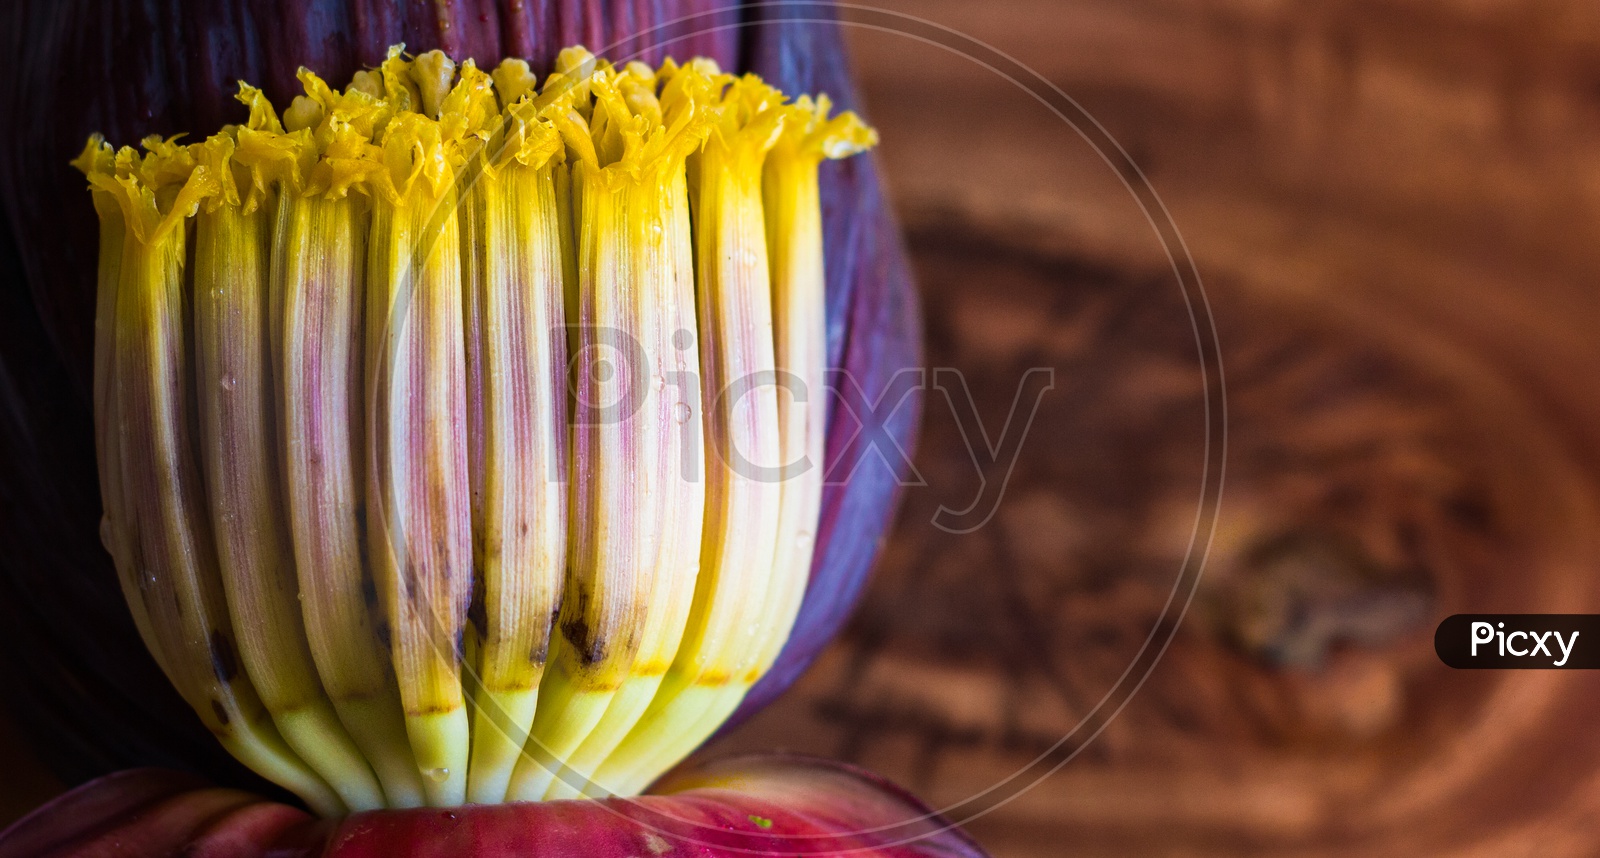 Close Up Macro Of Banana Blossom Mocha, Flowers Of Unripe Banana In Wooden Background With Copy Space For Text.